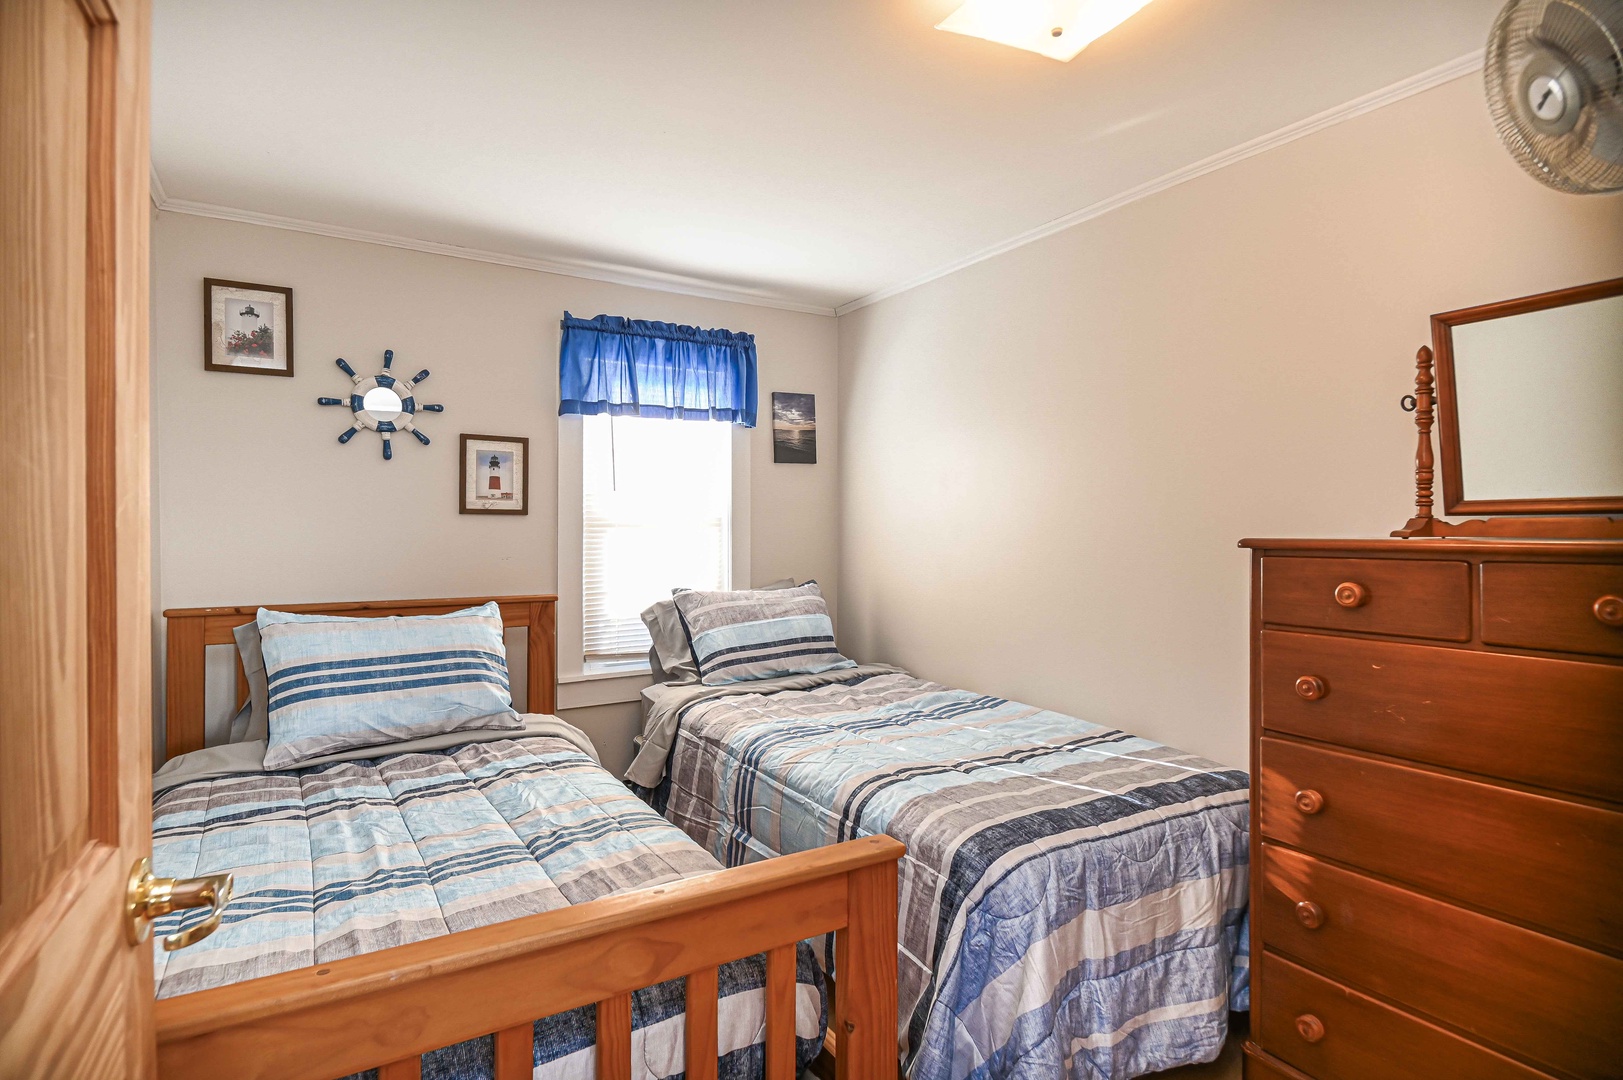 A pair of twin beds & large dresser awaits in the second bedroom